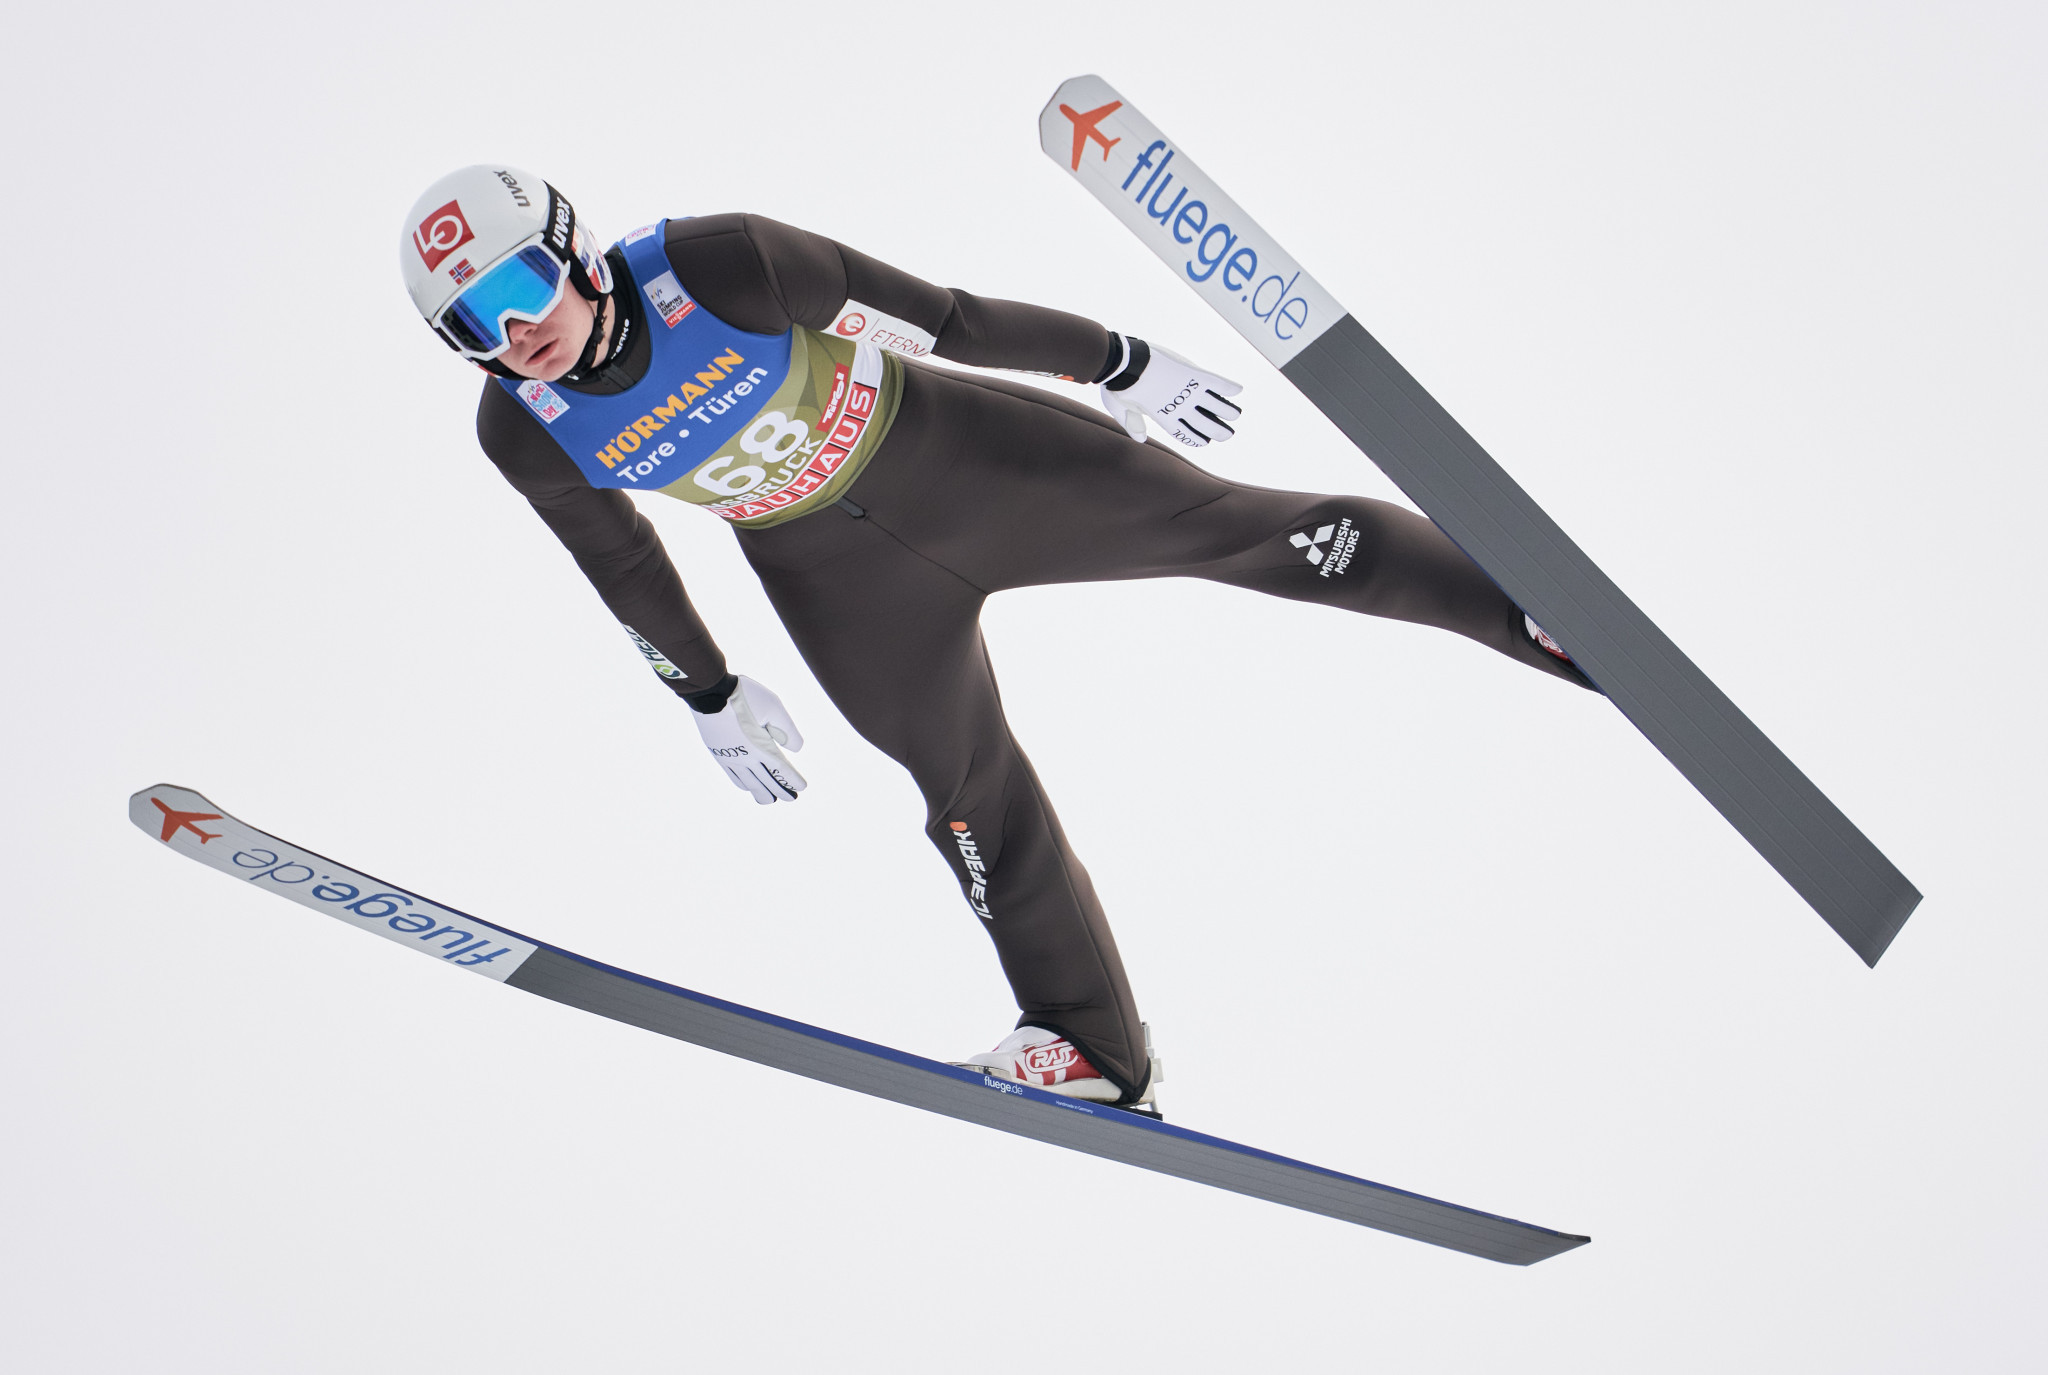 Marius Lindvik continued his good form in qualification for the Four Hills Tournament event in Innsbruck ©Getty Images